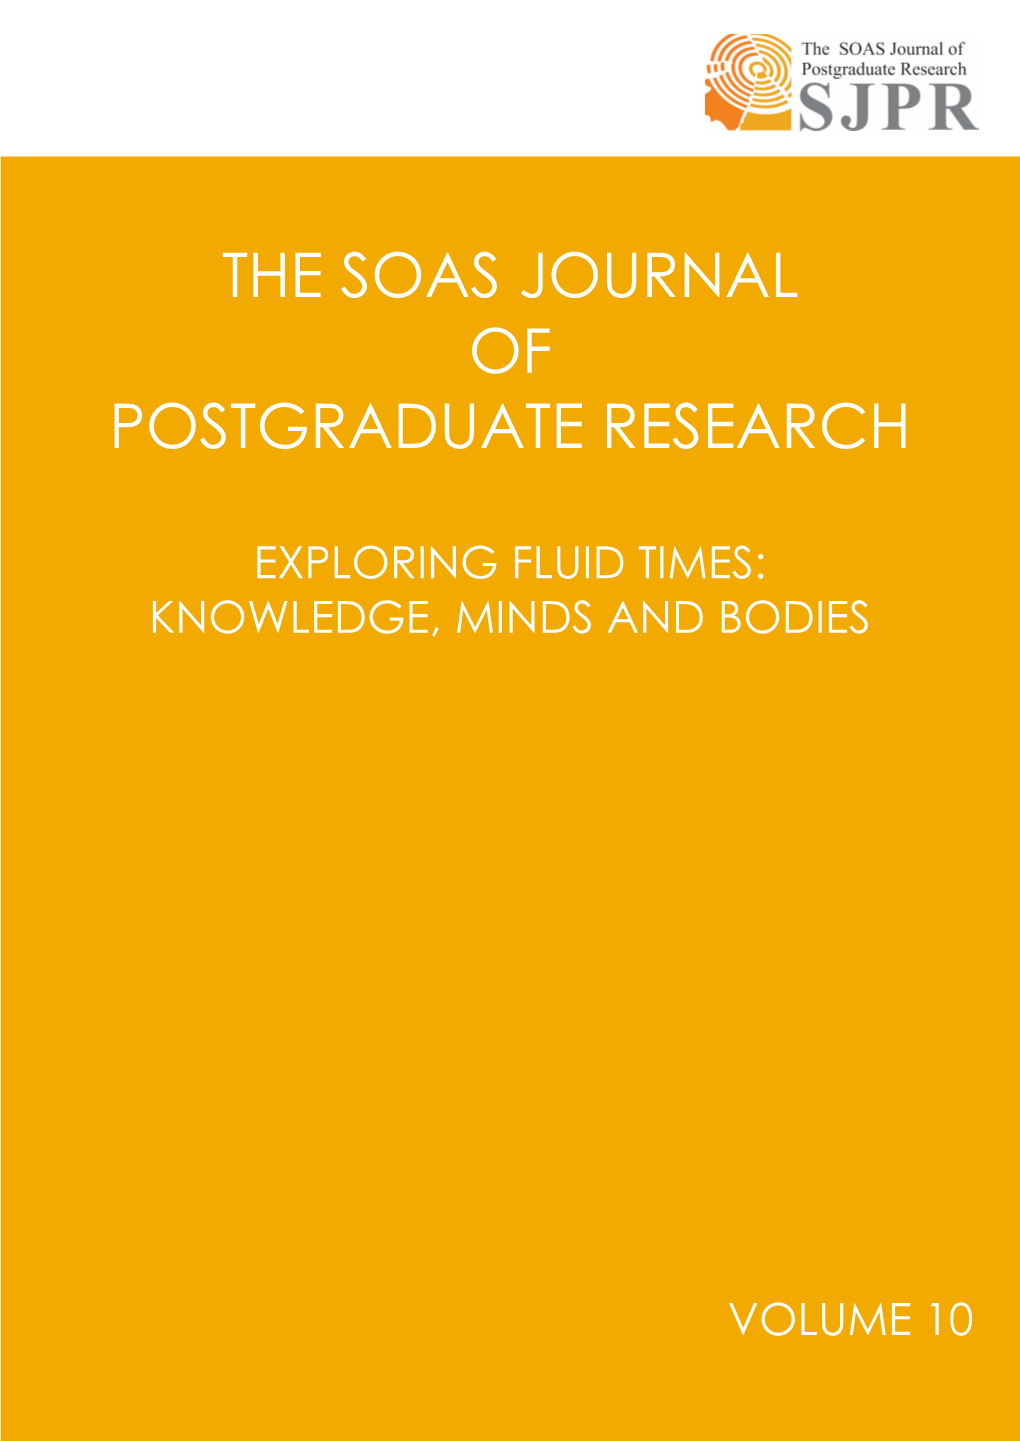 The Soas Journal of Postgraduate Research